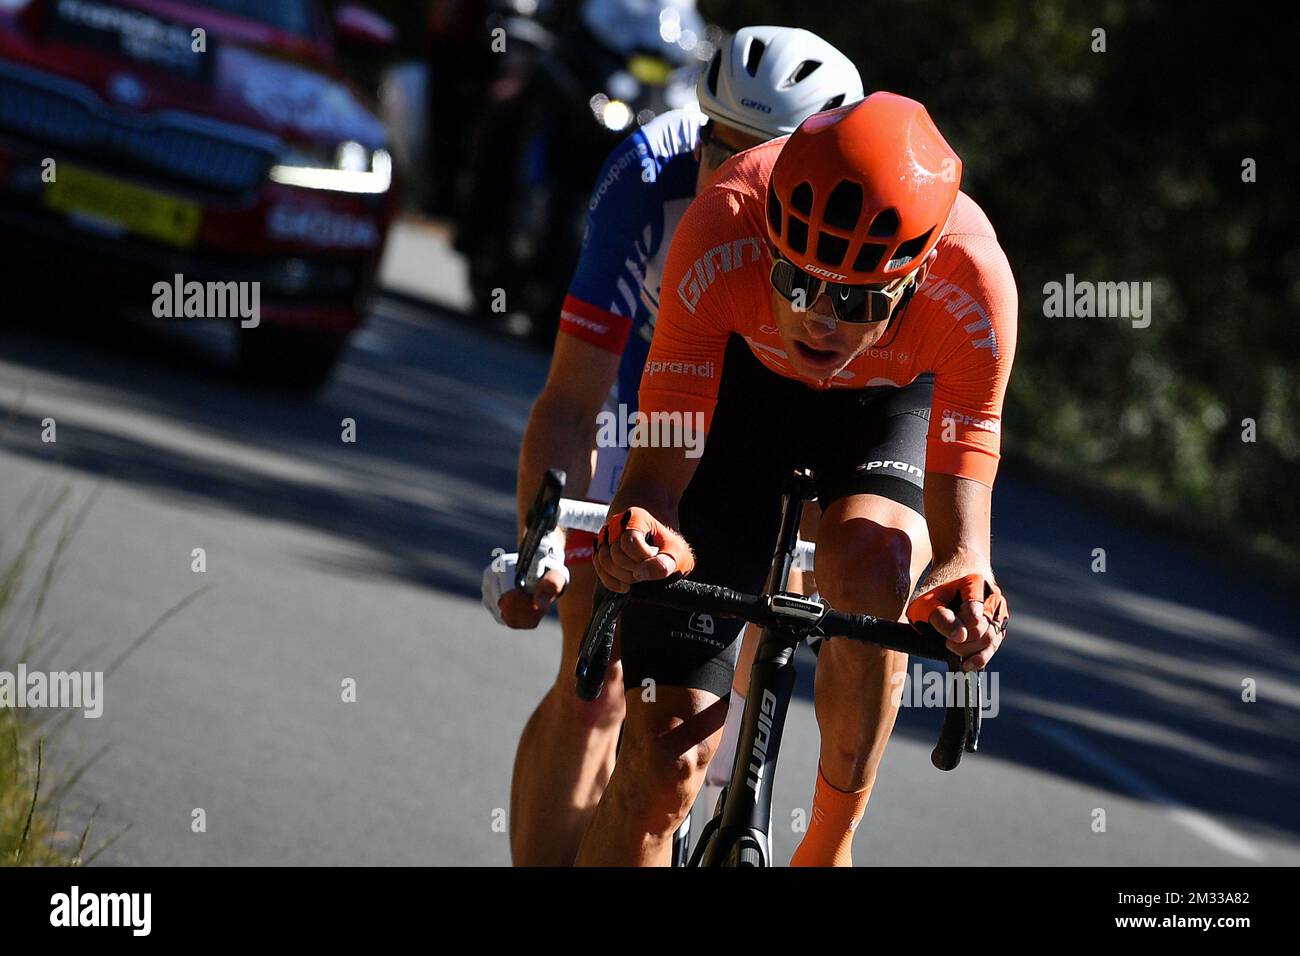 Michael Schar of CCC Team pictured in action during the ninth stage of the 107th edition of the Tour de France cycling race from Ile d'Oleron Le Chateau-d'Oleron to Ile de Re Saint-Martin-de-Re (168,5km), in France, Tuesday 08 September 2020. This year's Tour de France was postponed due to the worldwide Covid-19 pandemic. The 2020 race starts in Nice on Saturday 29 August and ends on 20 September. BELGA PHOTO DAVID STOCKMAN Stock Photo